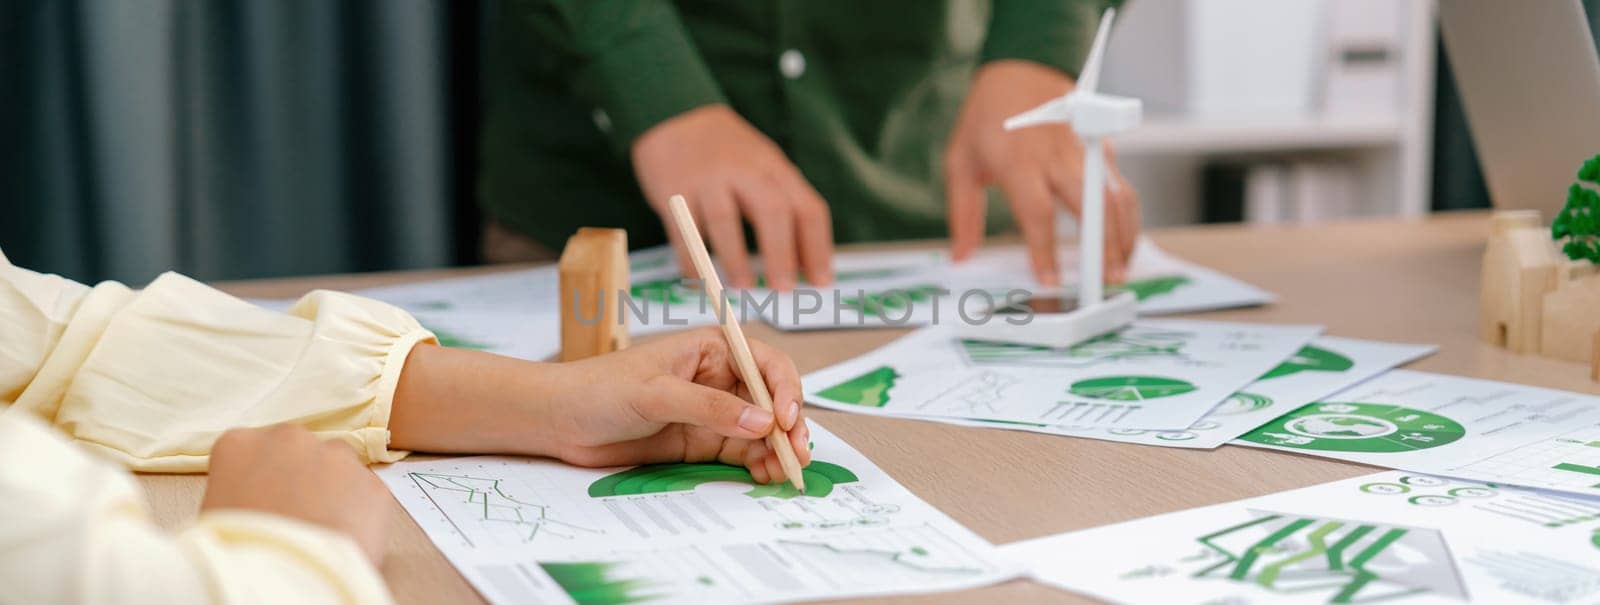 Professional businesswoman attended in green business meeting while male investor presenting about using clean energy on table with environmental document scatter around. Focus on hand. Delineation.